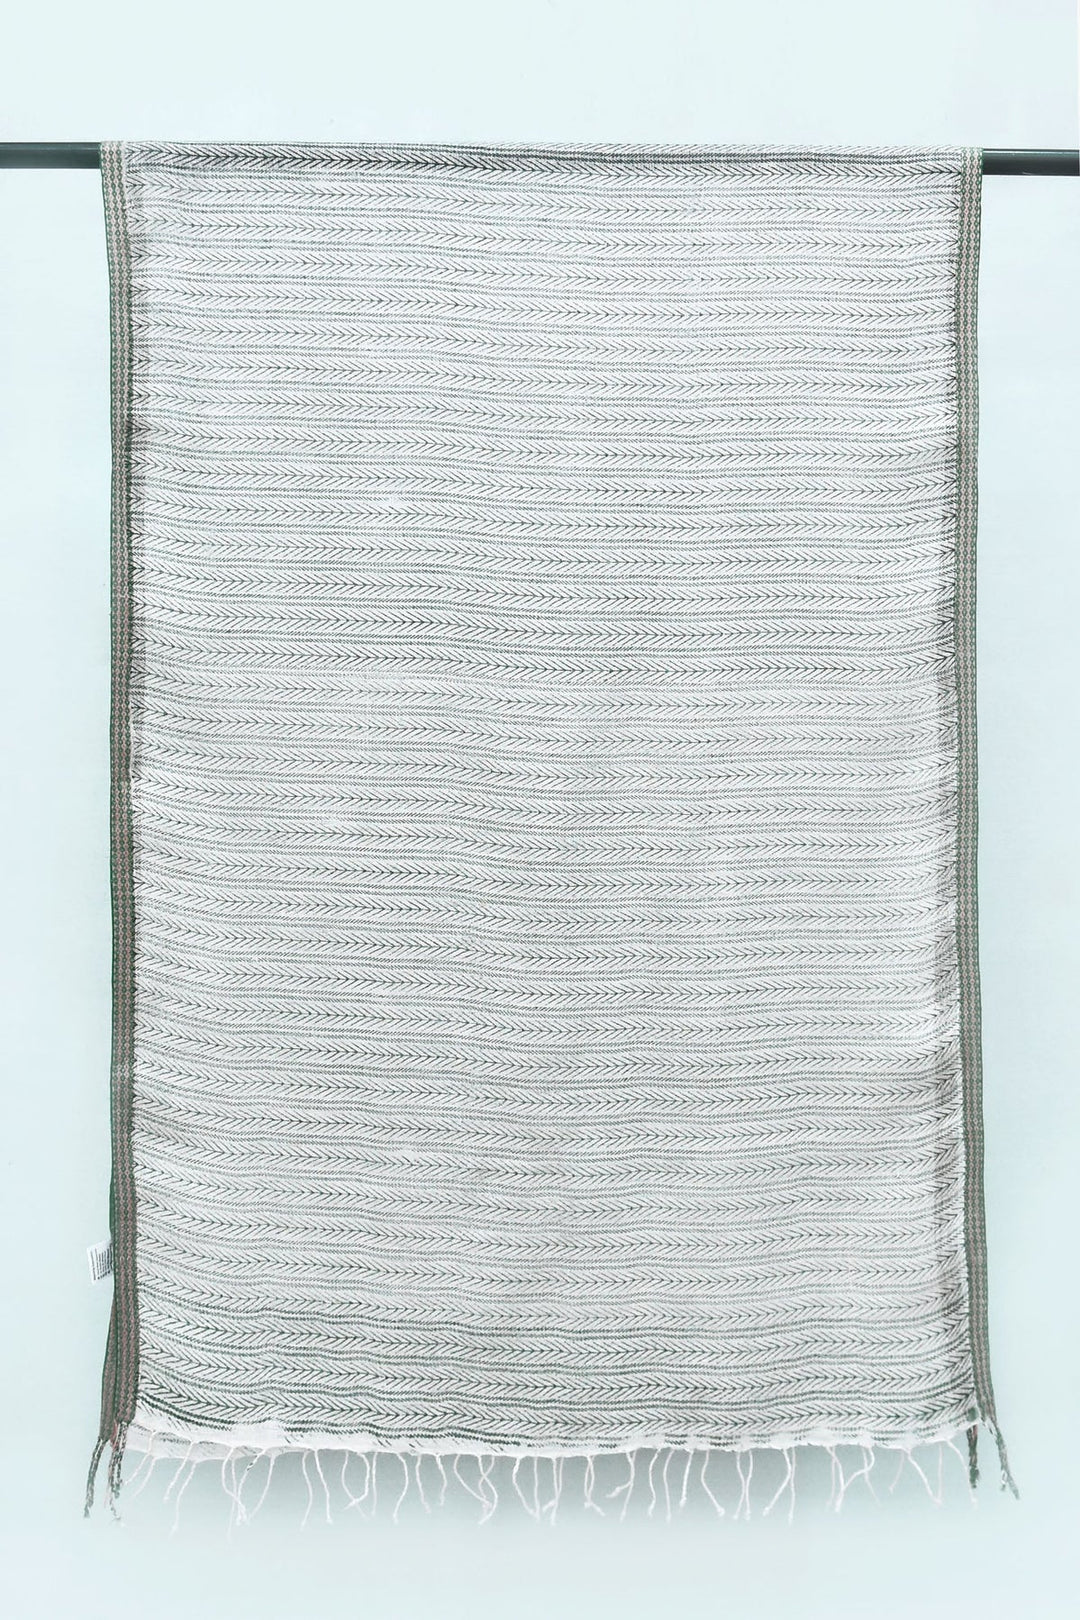 Striped Linen Stole with Block Print Borders | Enfys Handwoven Linen Stole - Gray & White